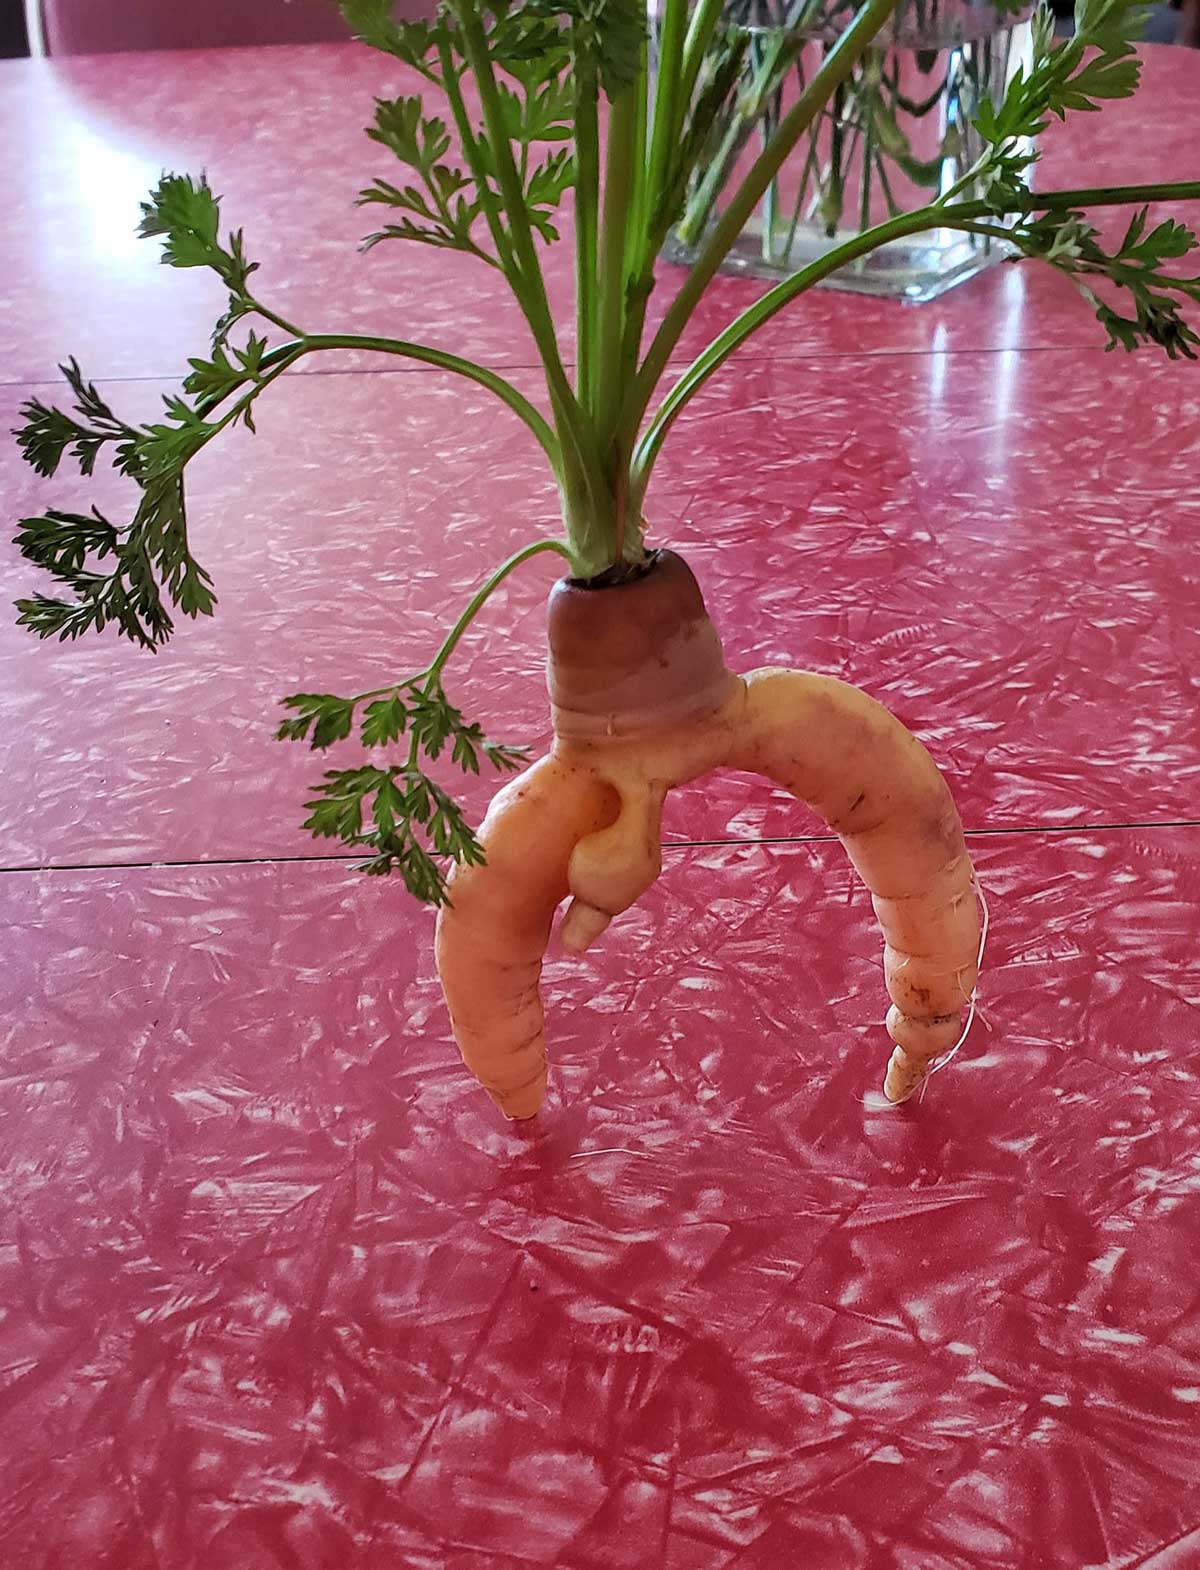 A friend of mine loves to garden. Her carrots are.. unusual..